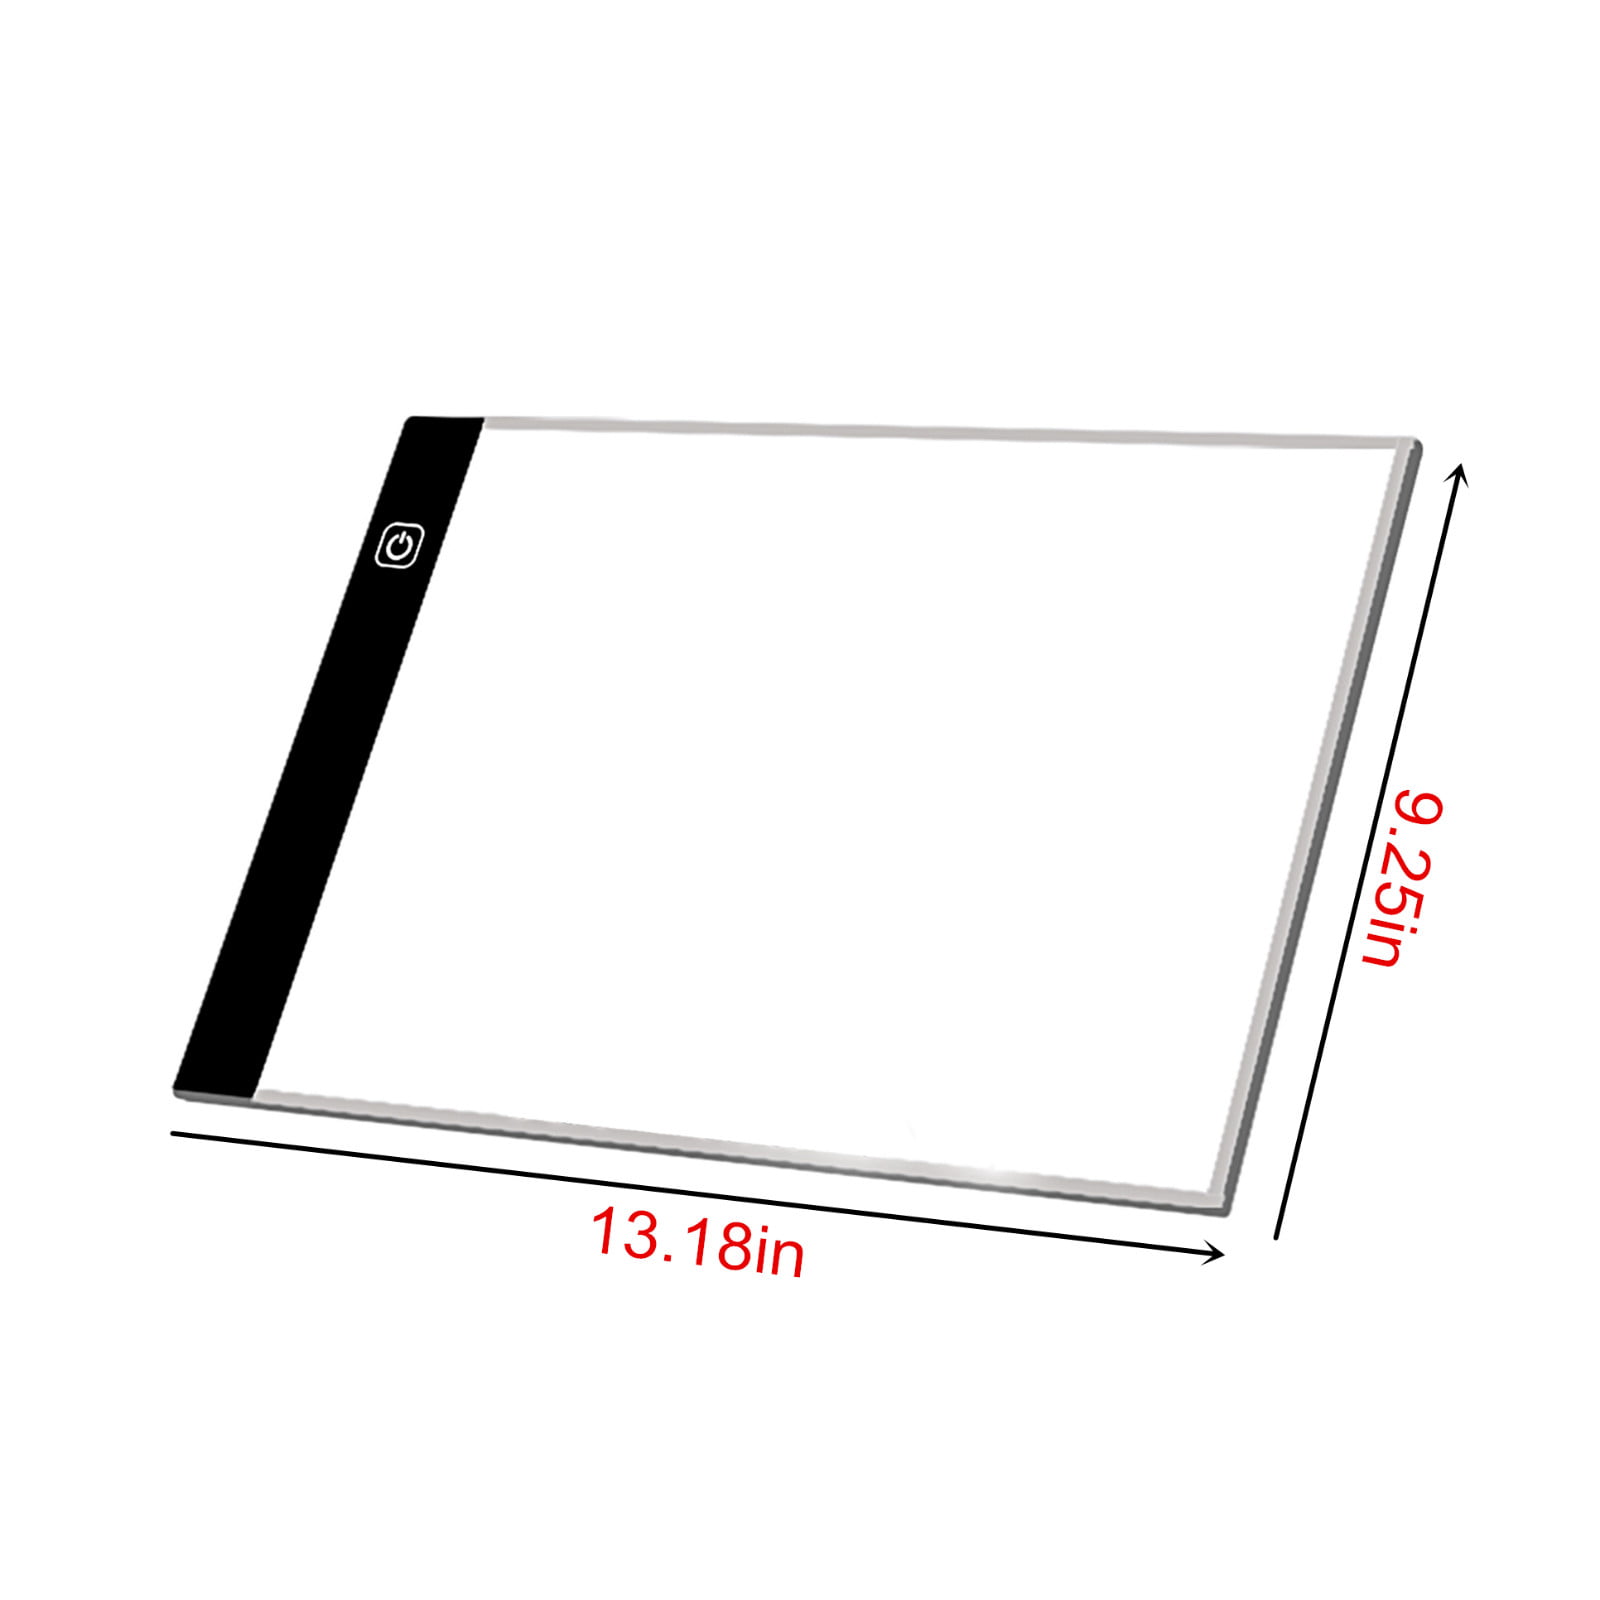 Rechargeable A4 Wireless LED Tracing Light Box-Winshine Dimmable Battery  Powered Light Pad for Tracing, Portable Light Board in Light Weight for  Aritist Drawing